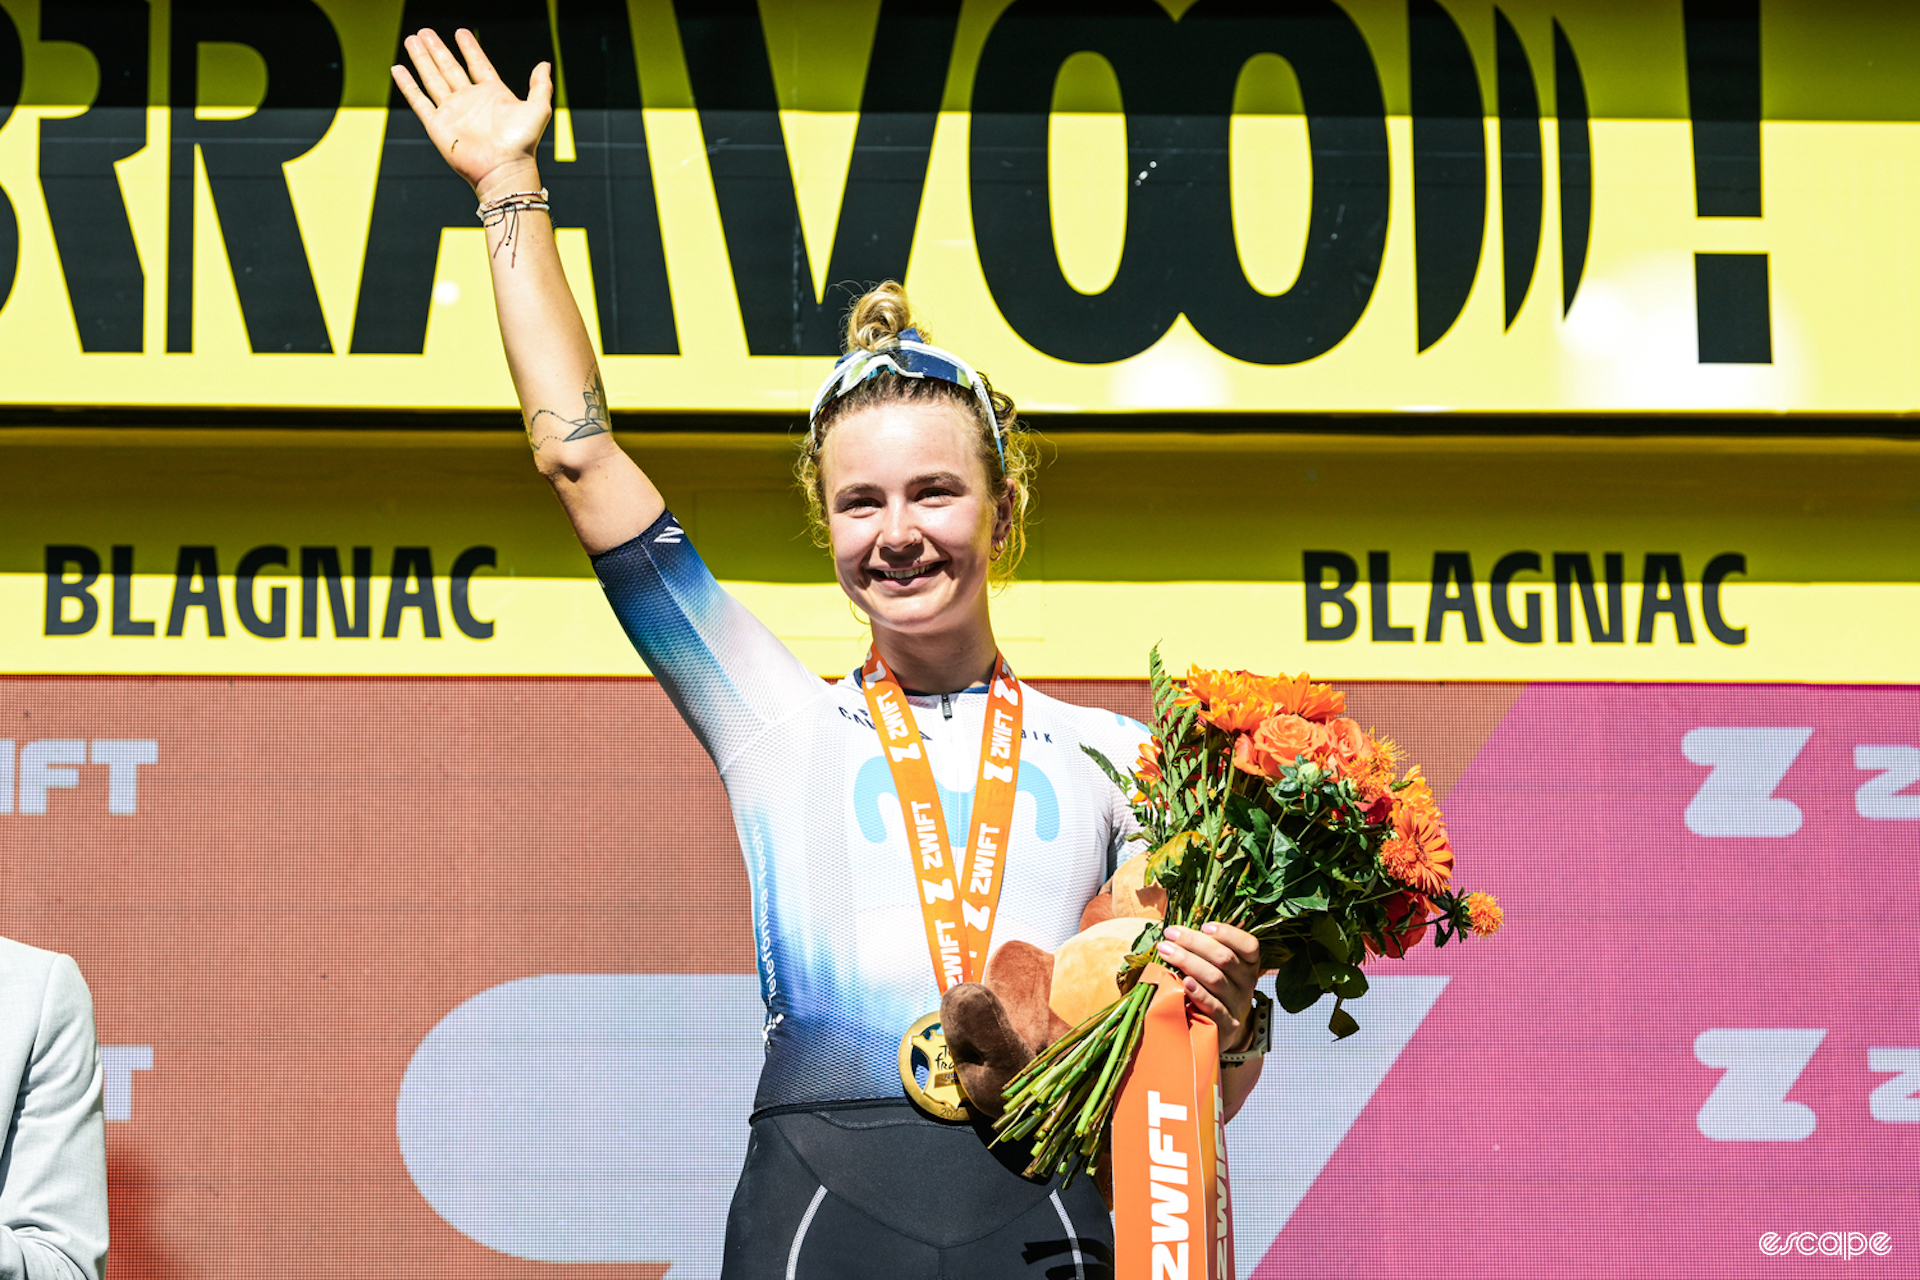 A smiling Emma Norsgaard waves from the podium after winning the sixth stage of the Tour de France Femmes.